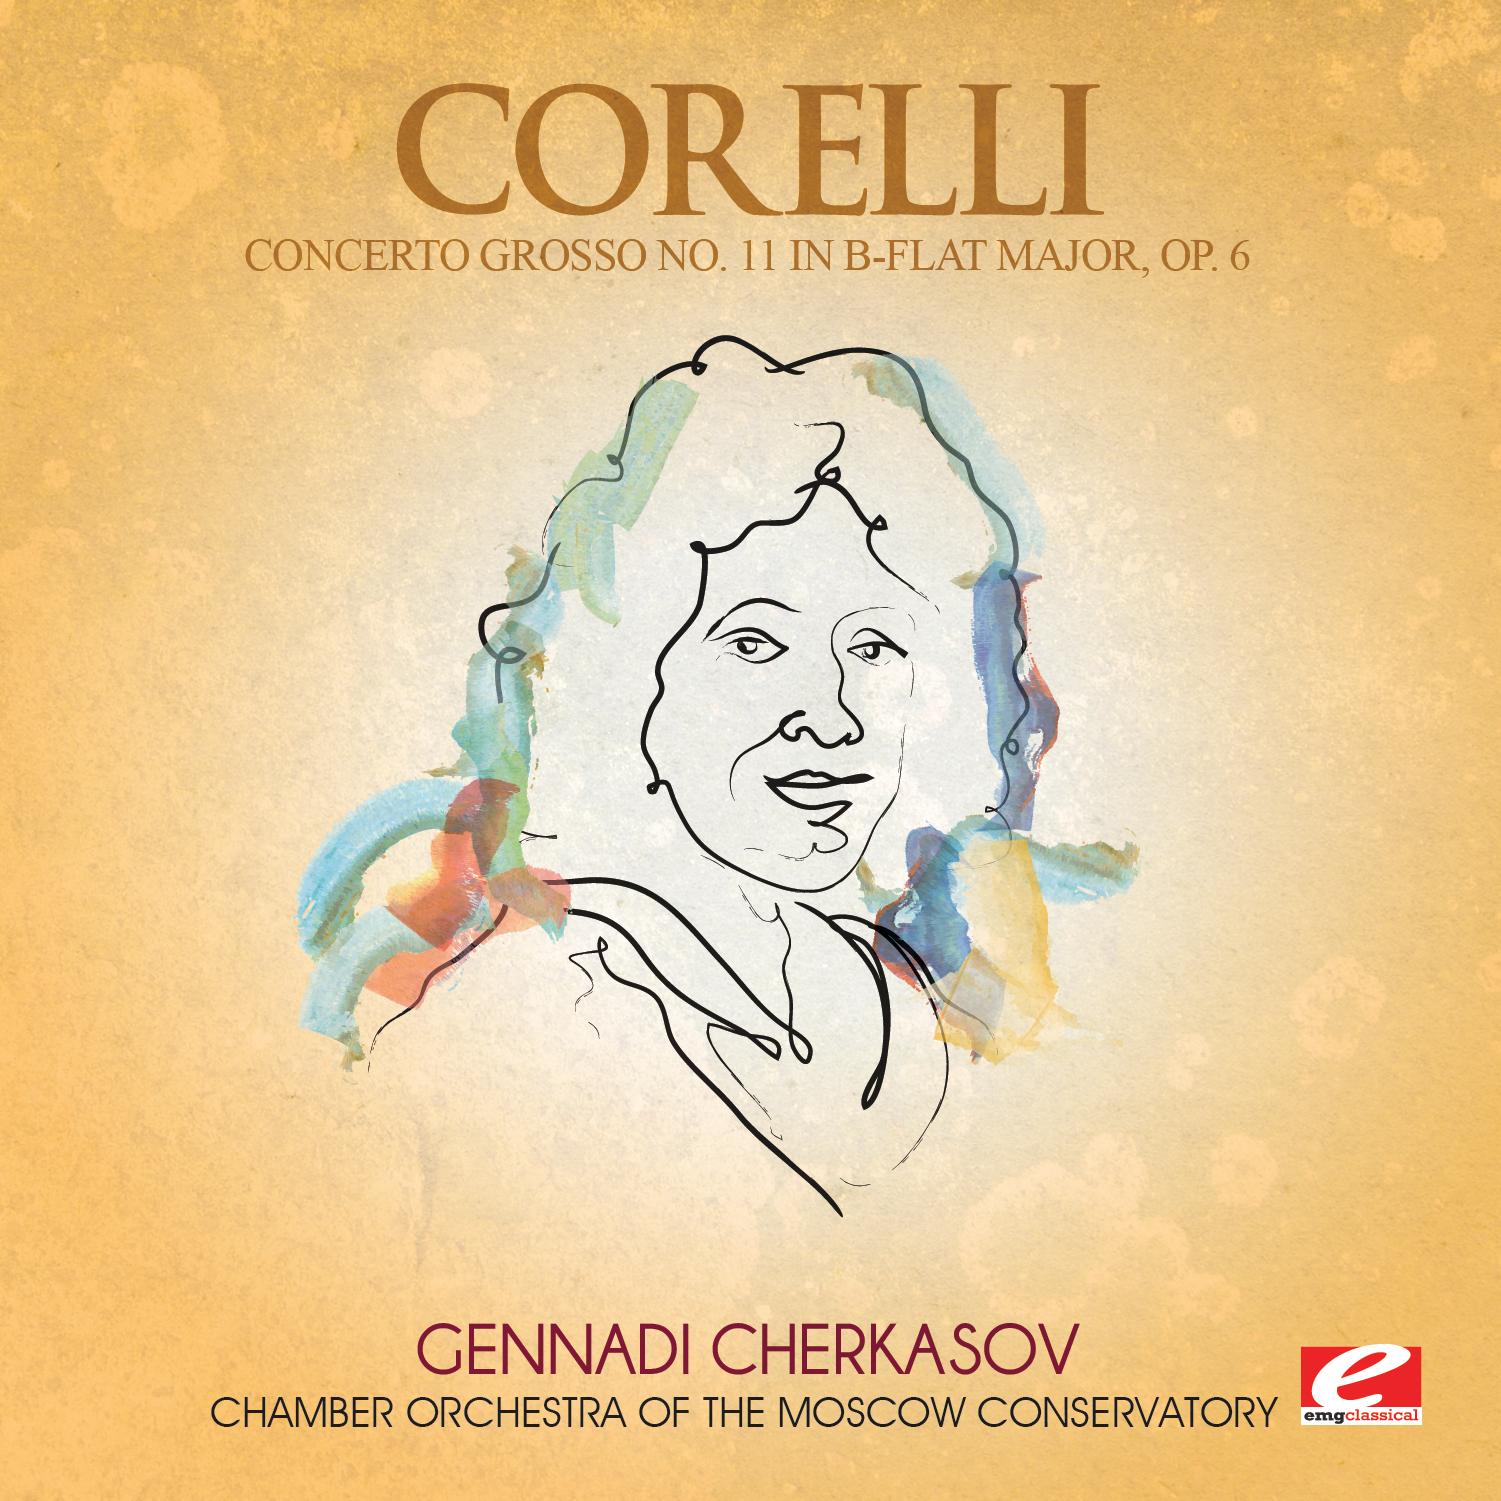 Corelli: Concerto Grosso No. 11 in B-Flat Major, Op. 6 (Digitally Remastered)